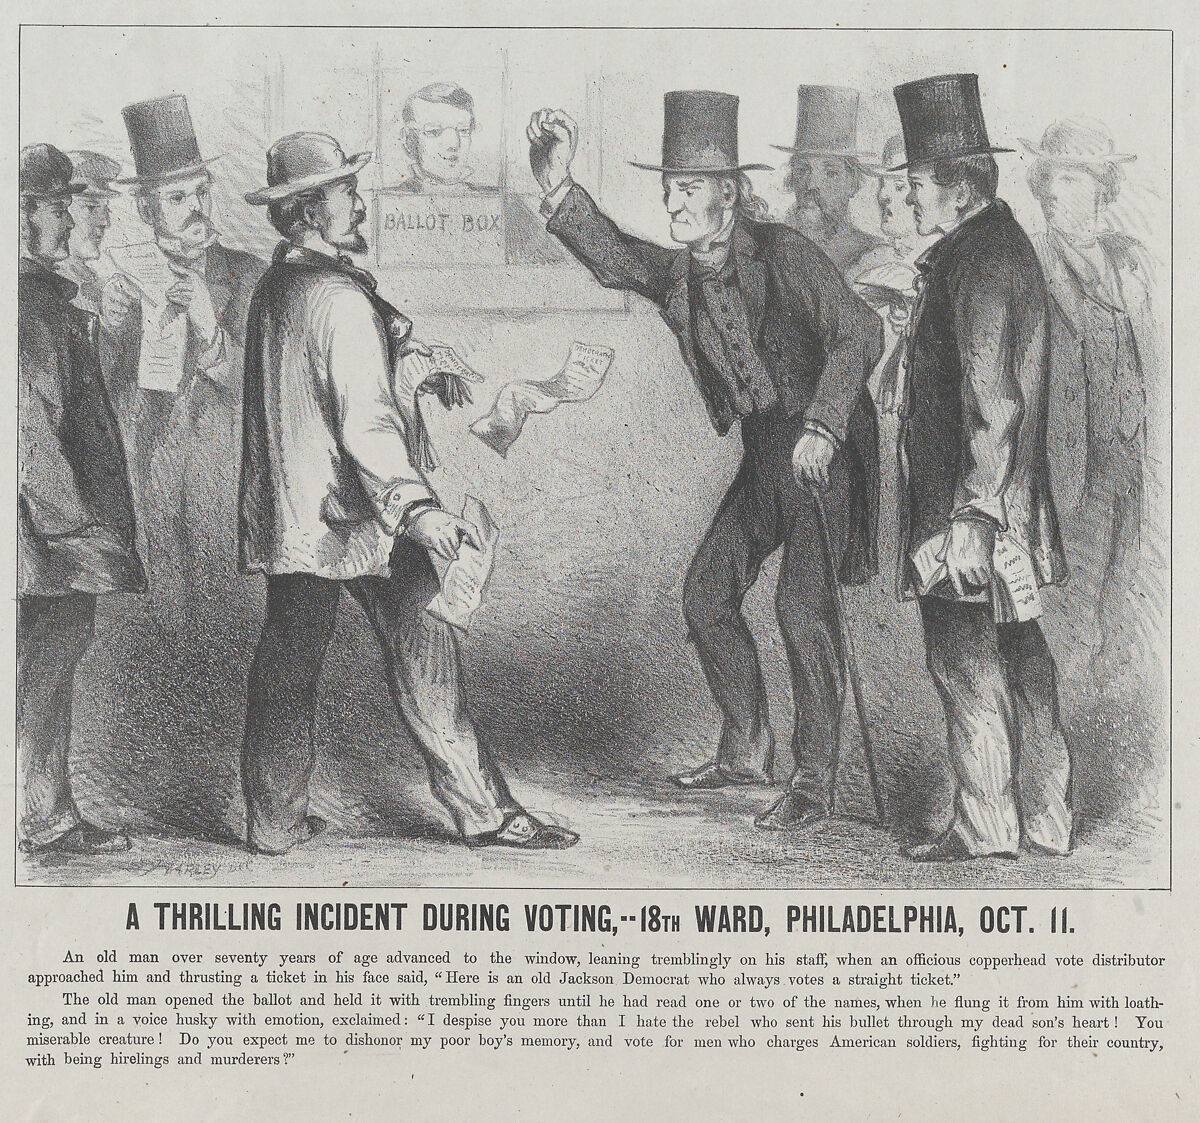 A Thrilling Incident During the Voting, 18th Ward, Philadelphia, October 11, Harley (American, active 1860s), Lithograph 